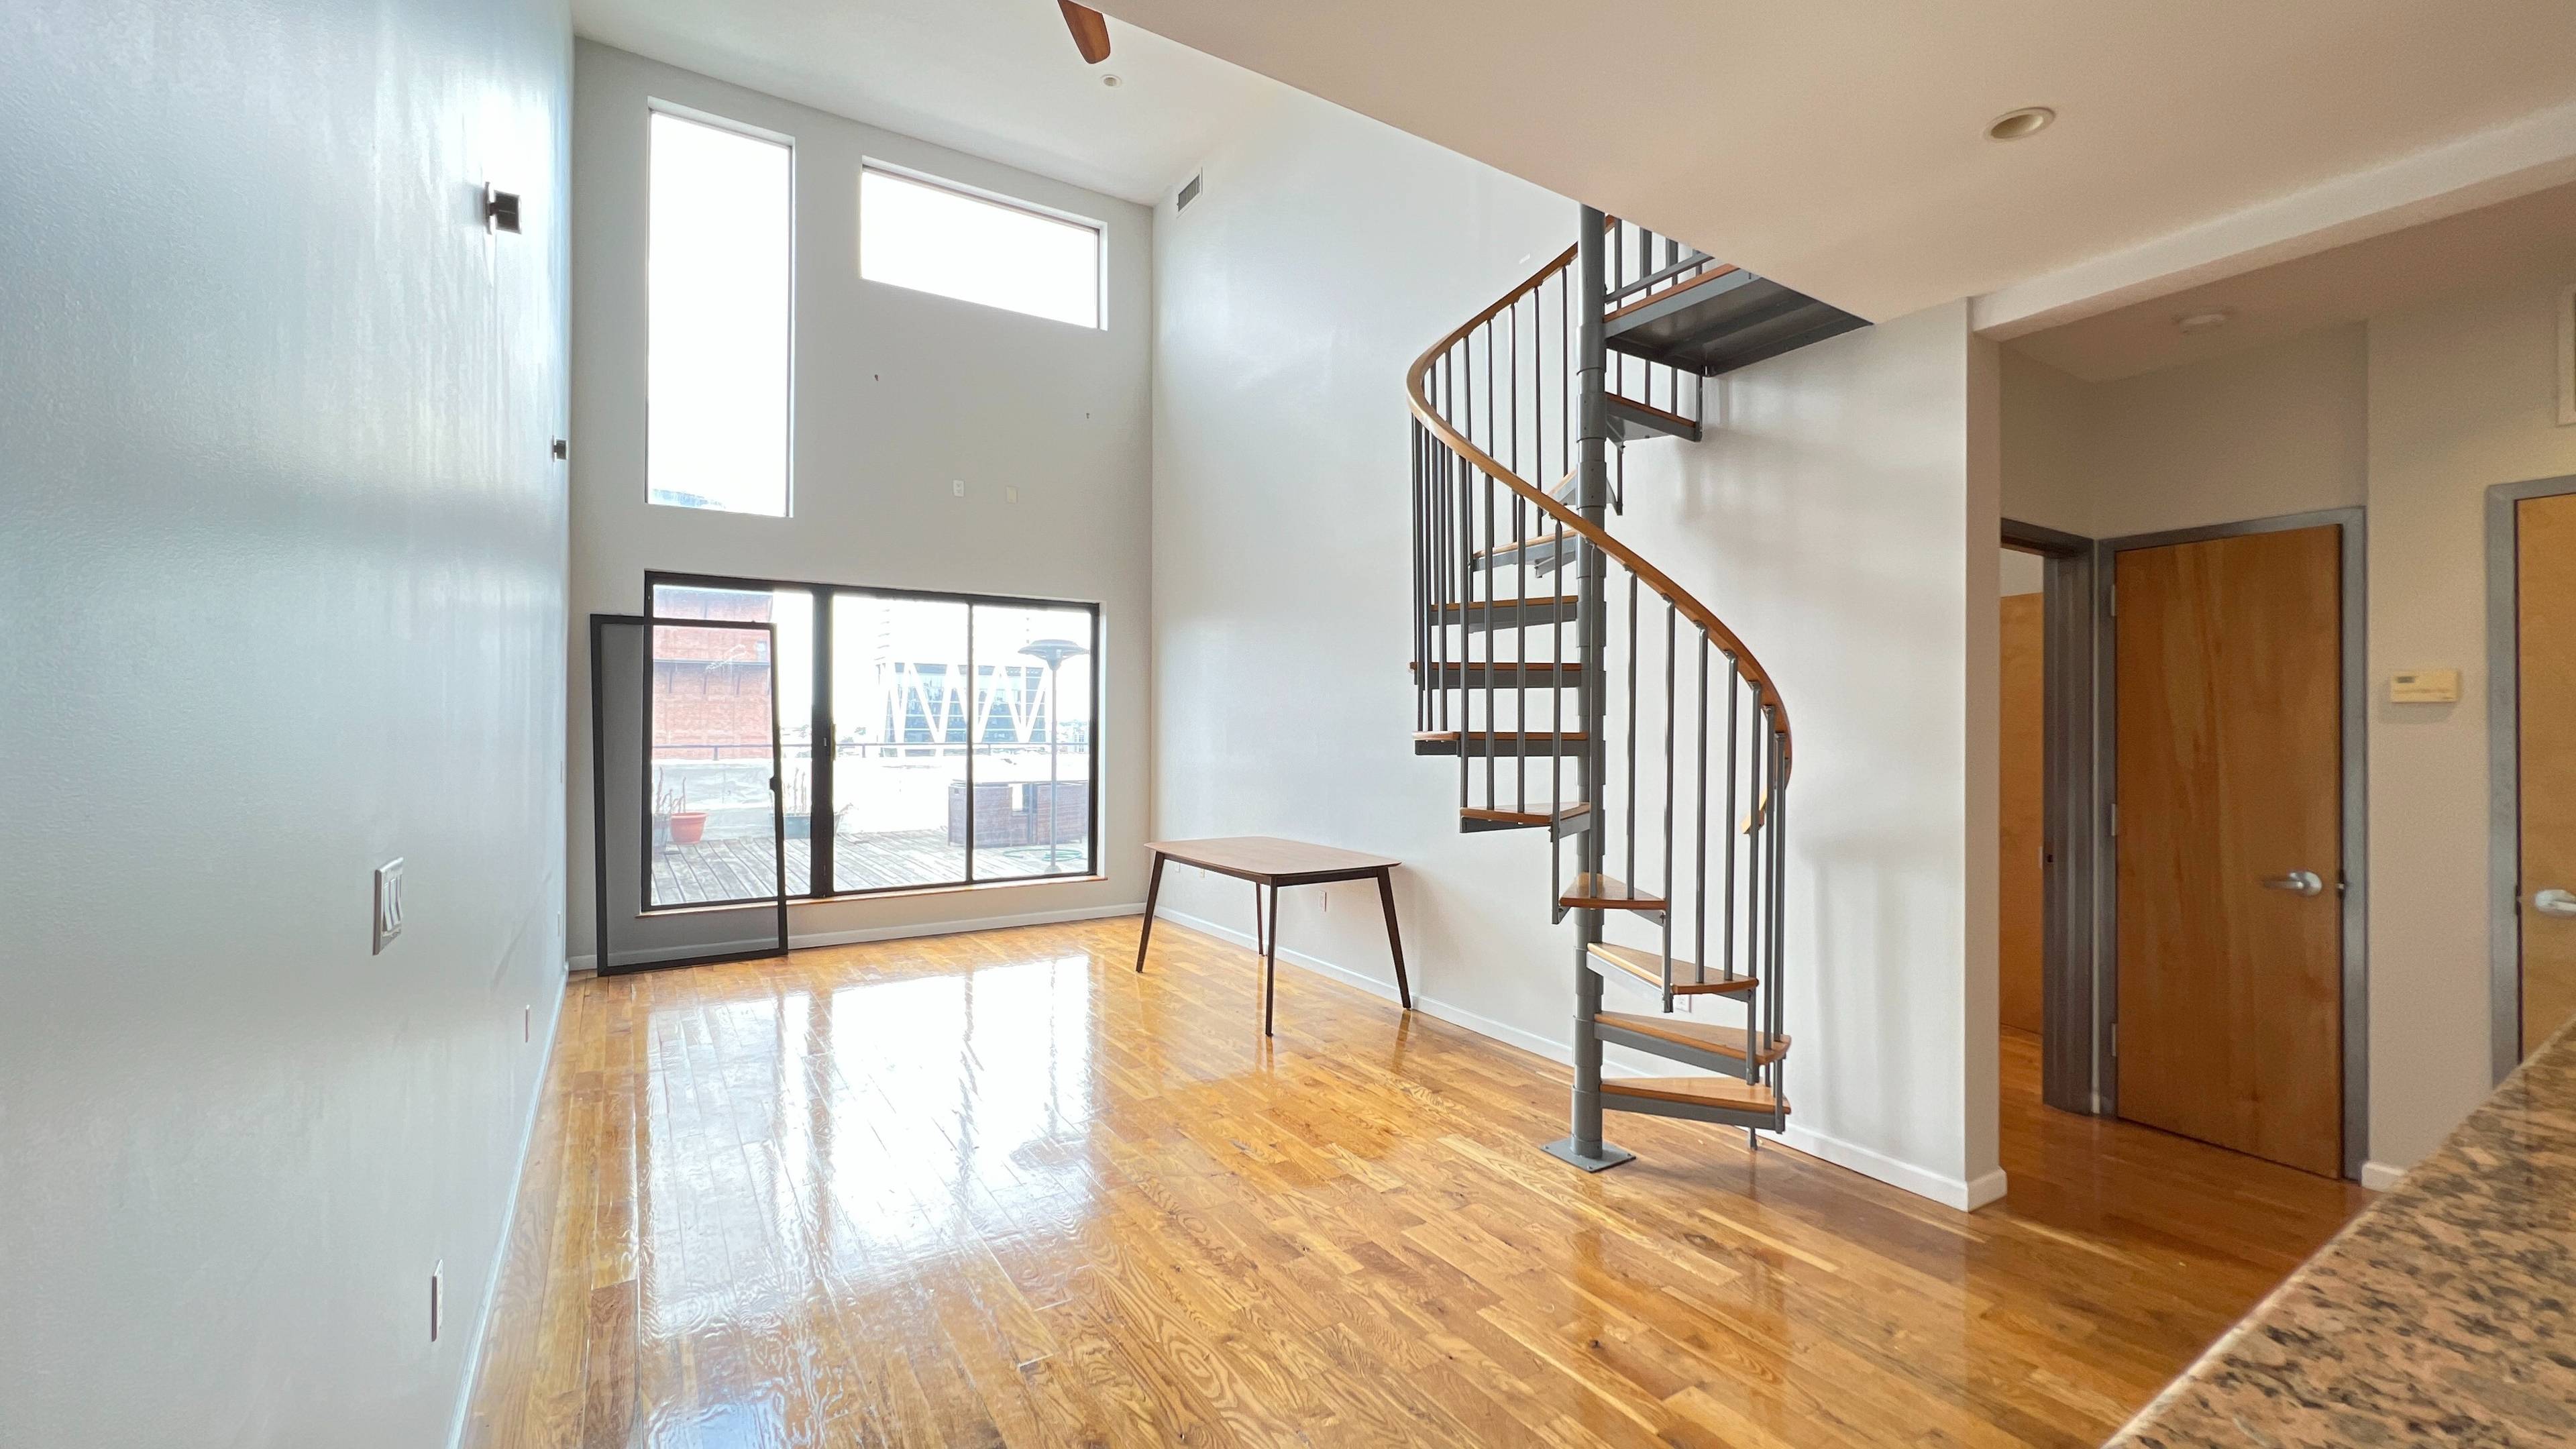 Our thoughts... Gorgeous Penthouse Duplex With Large Outdoor Space For Rent in the heart of North Williamsburg.